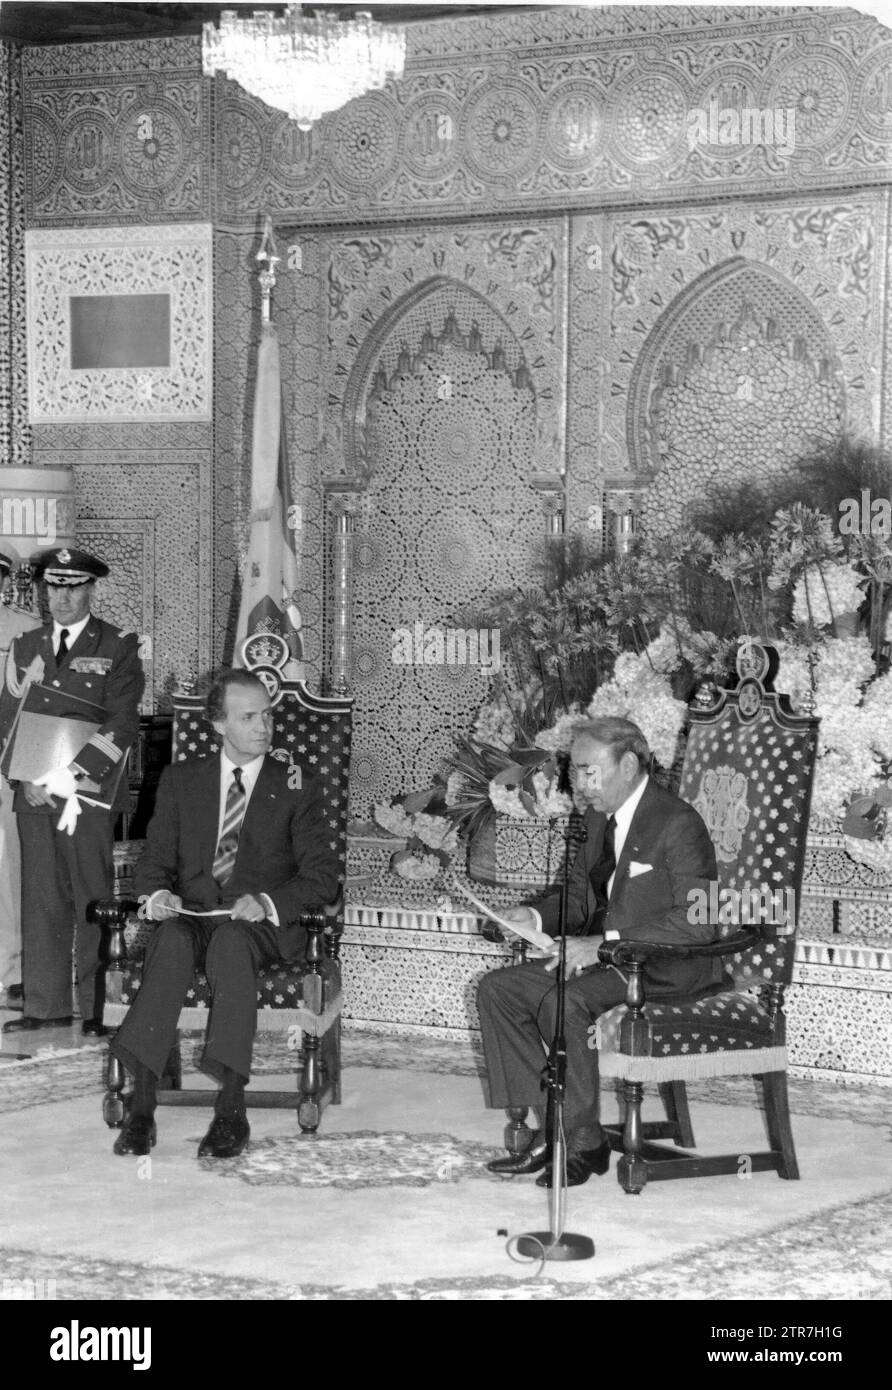 07/03/1991. Hassan II receives Juan Carlos I in Rabat on the occasion of the signing between Spain and Morocco of the Treaty of Friendship. Credit: Album / Archivo ABC / José María Barroso Stock Photo